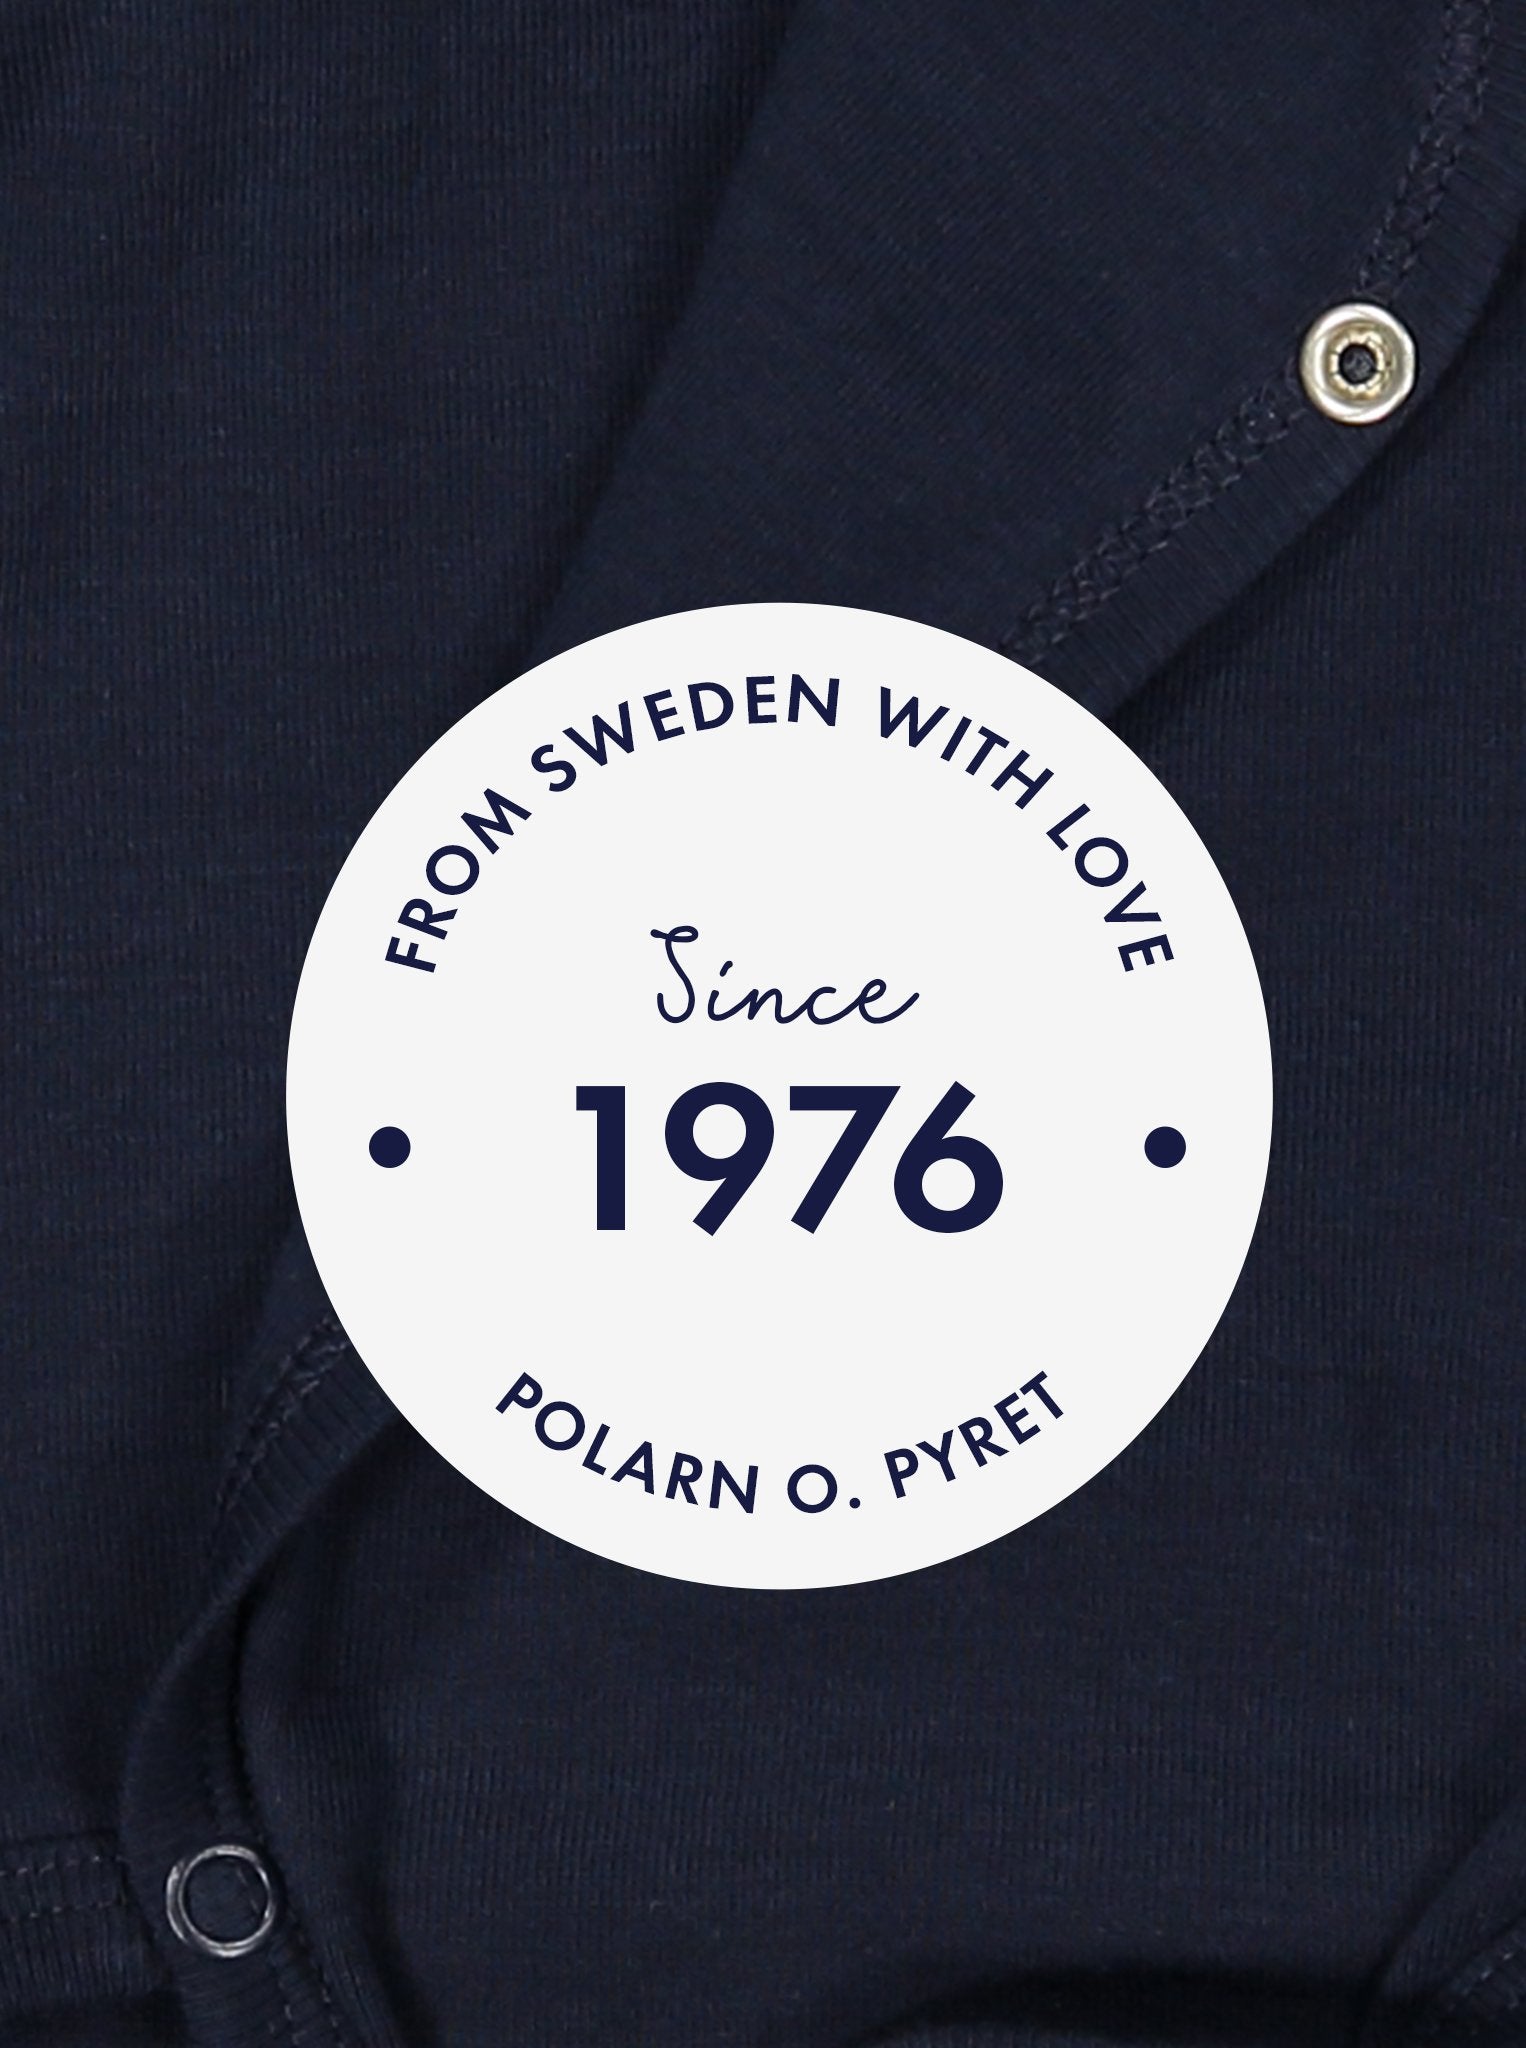 PO.P 1976 logo in navy, navy classic kids t-shirt, ethical organic cotton, polarn o. pyret quality